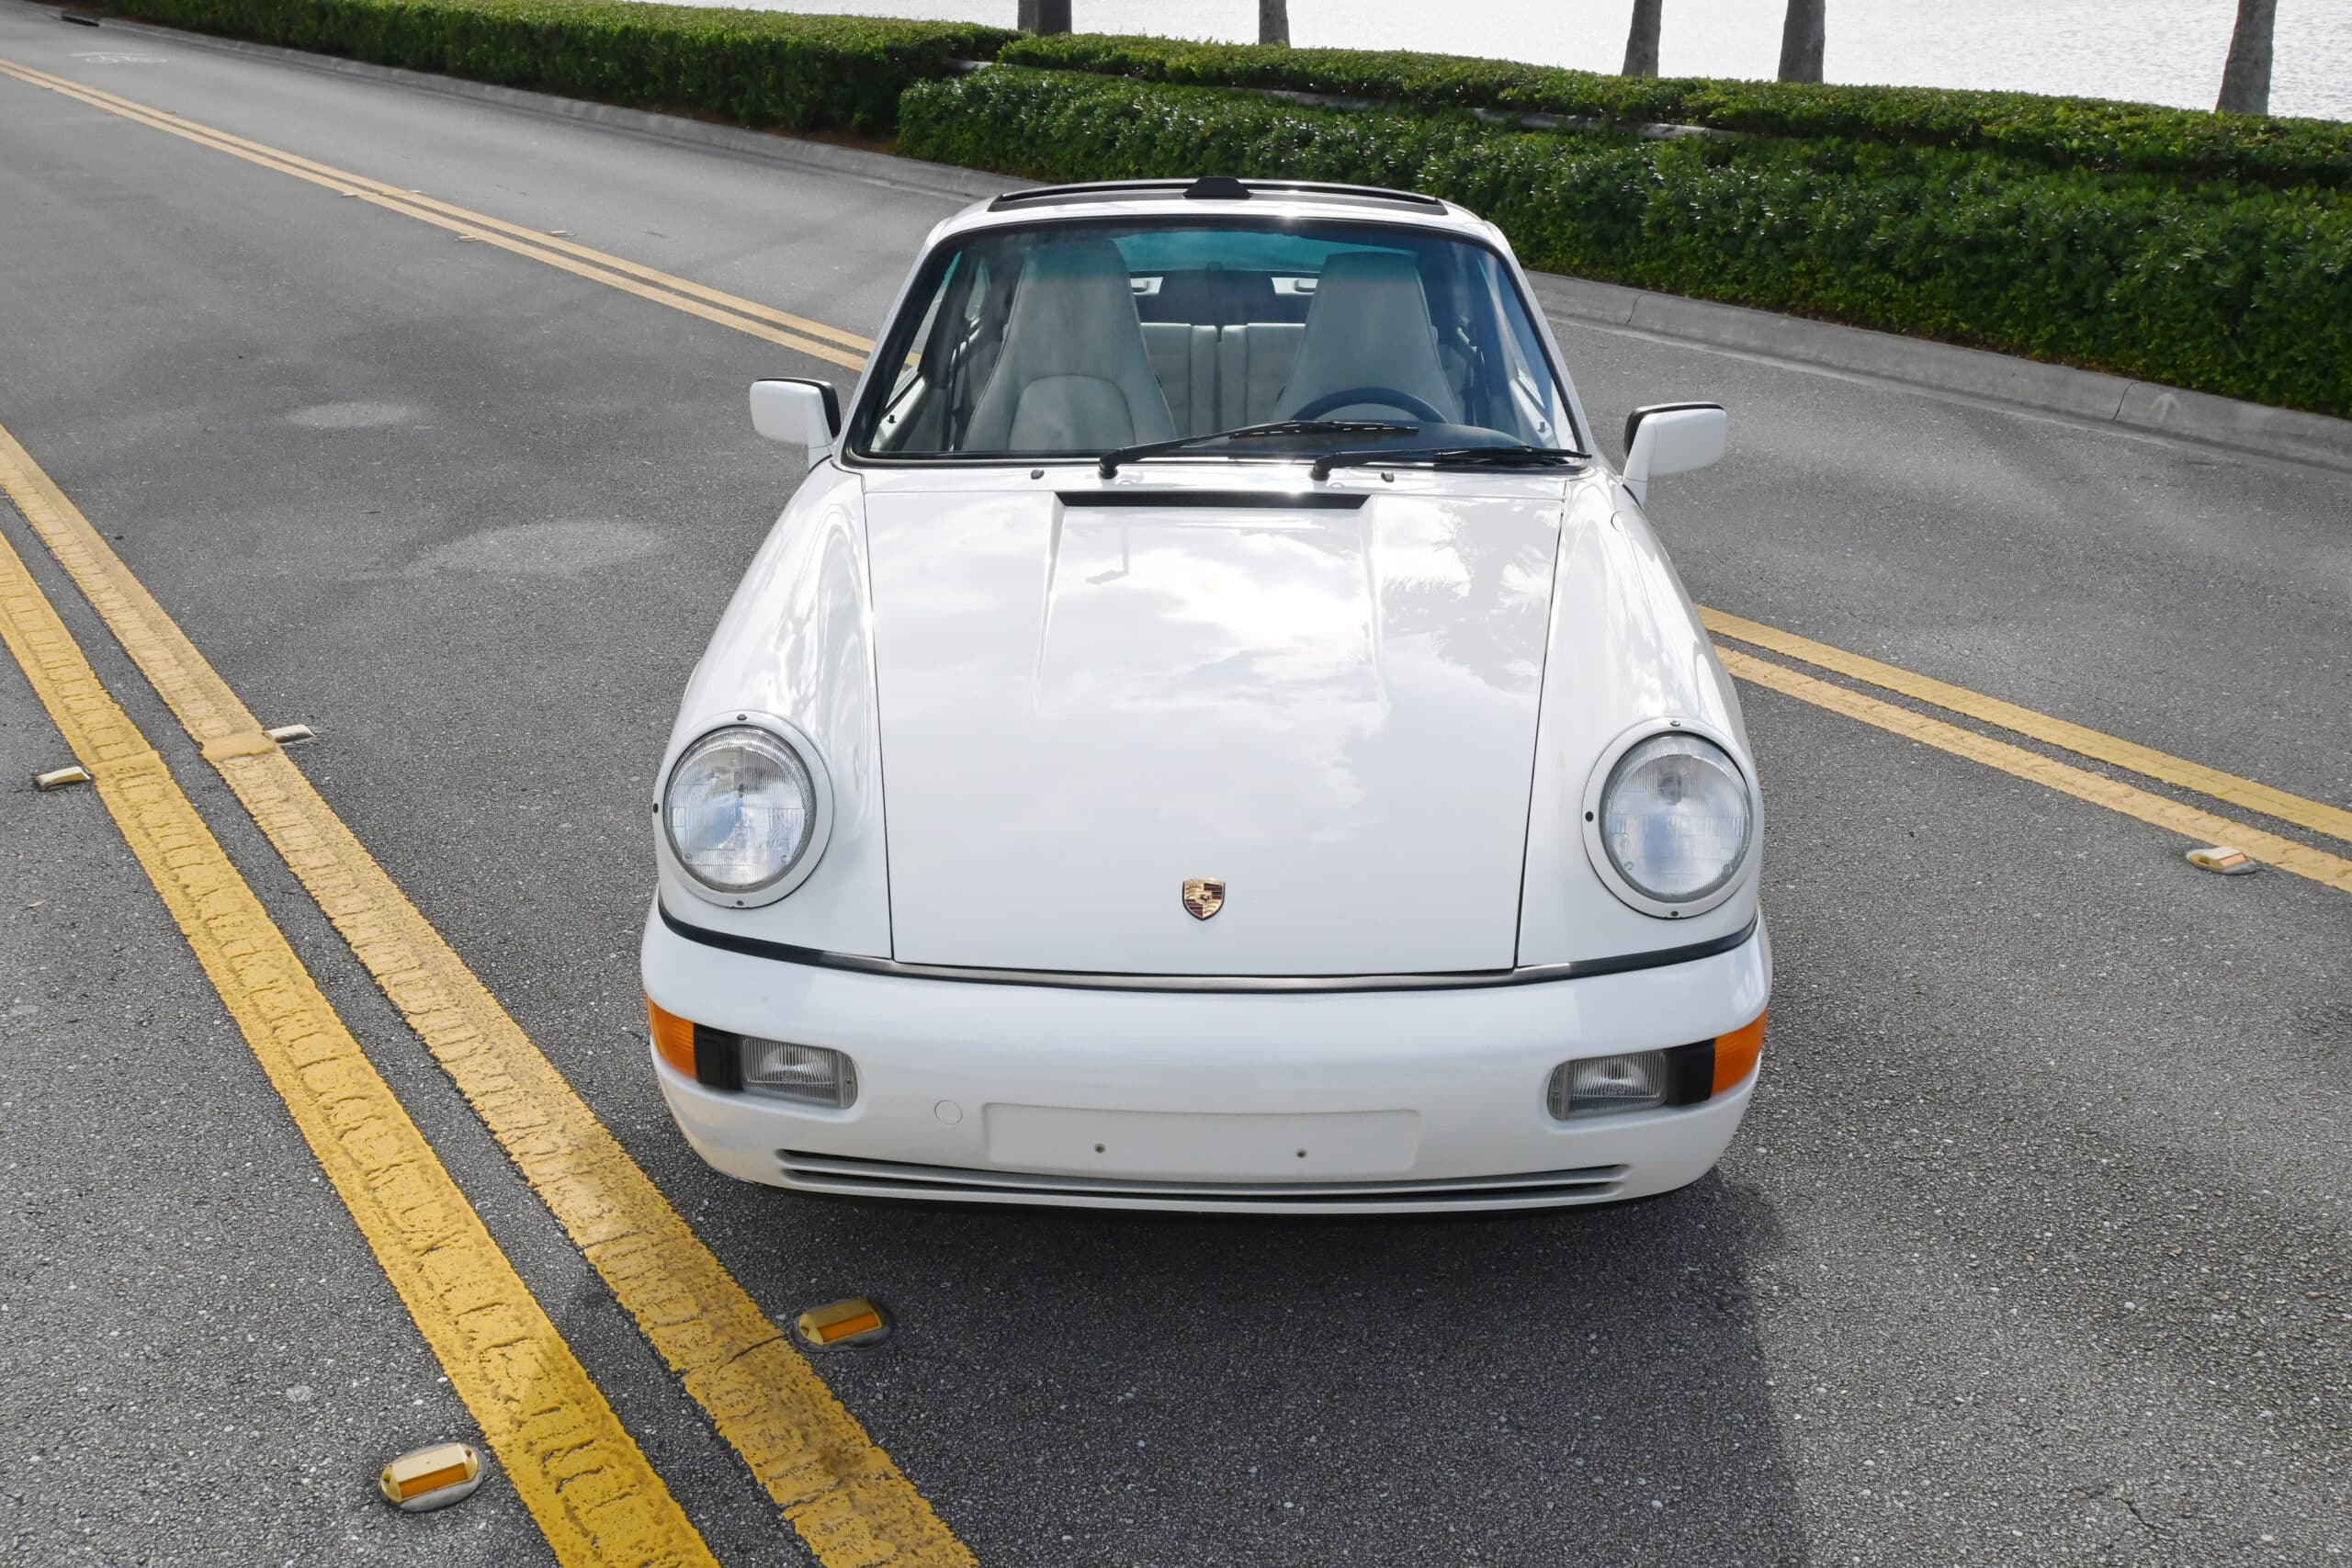 1990 964 Carrera 4, Rare white on white color combo, Two owner, Verified 50K Actual Miles, all original unmolested